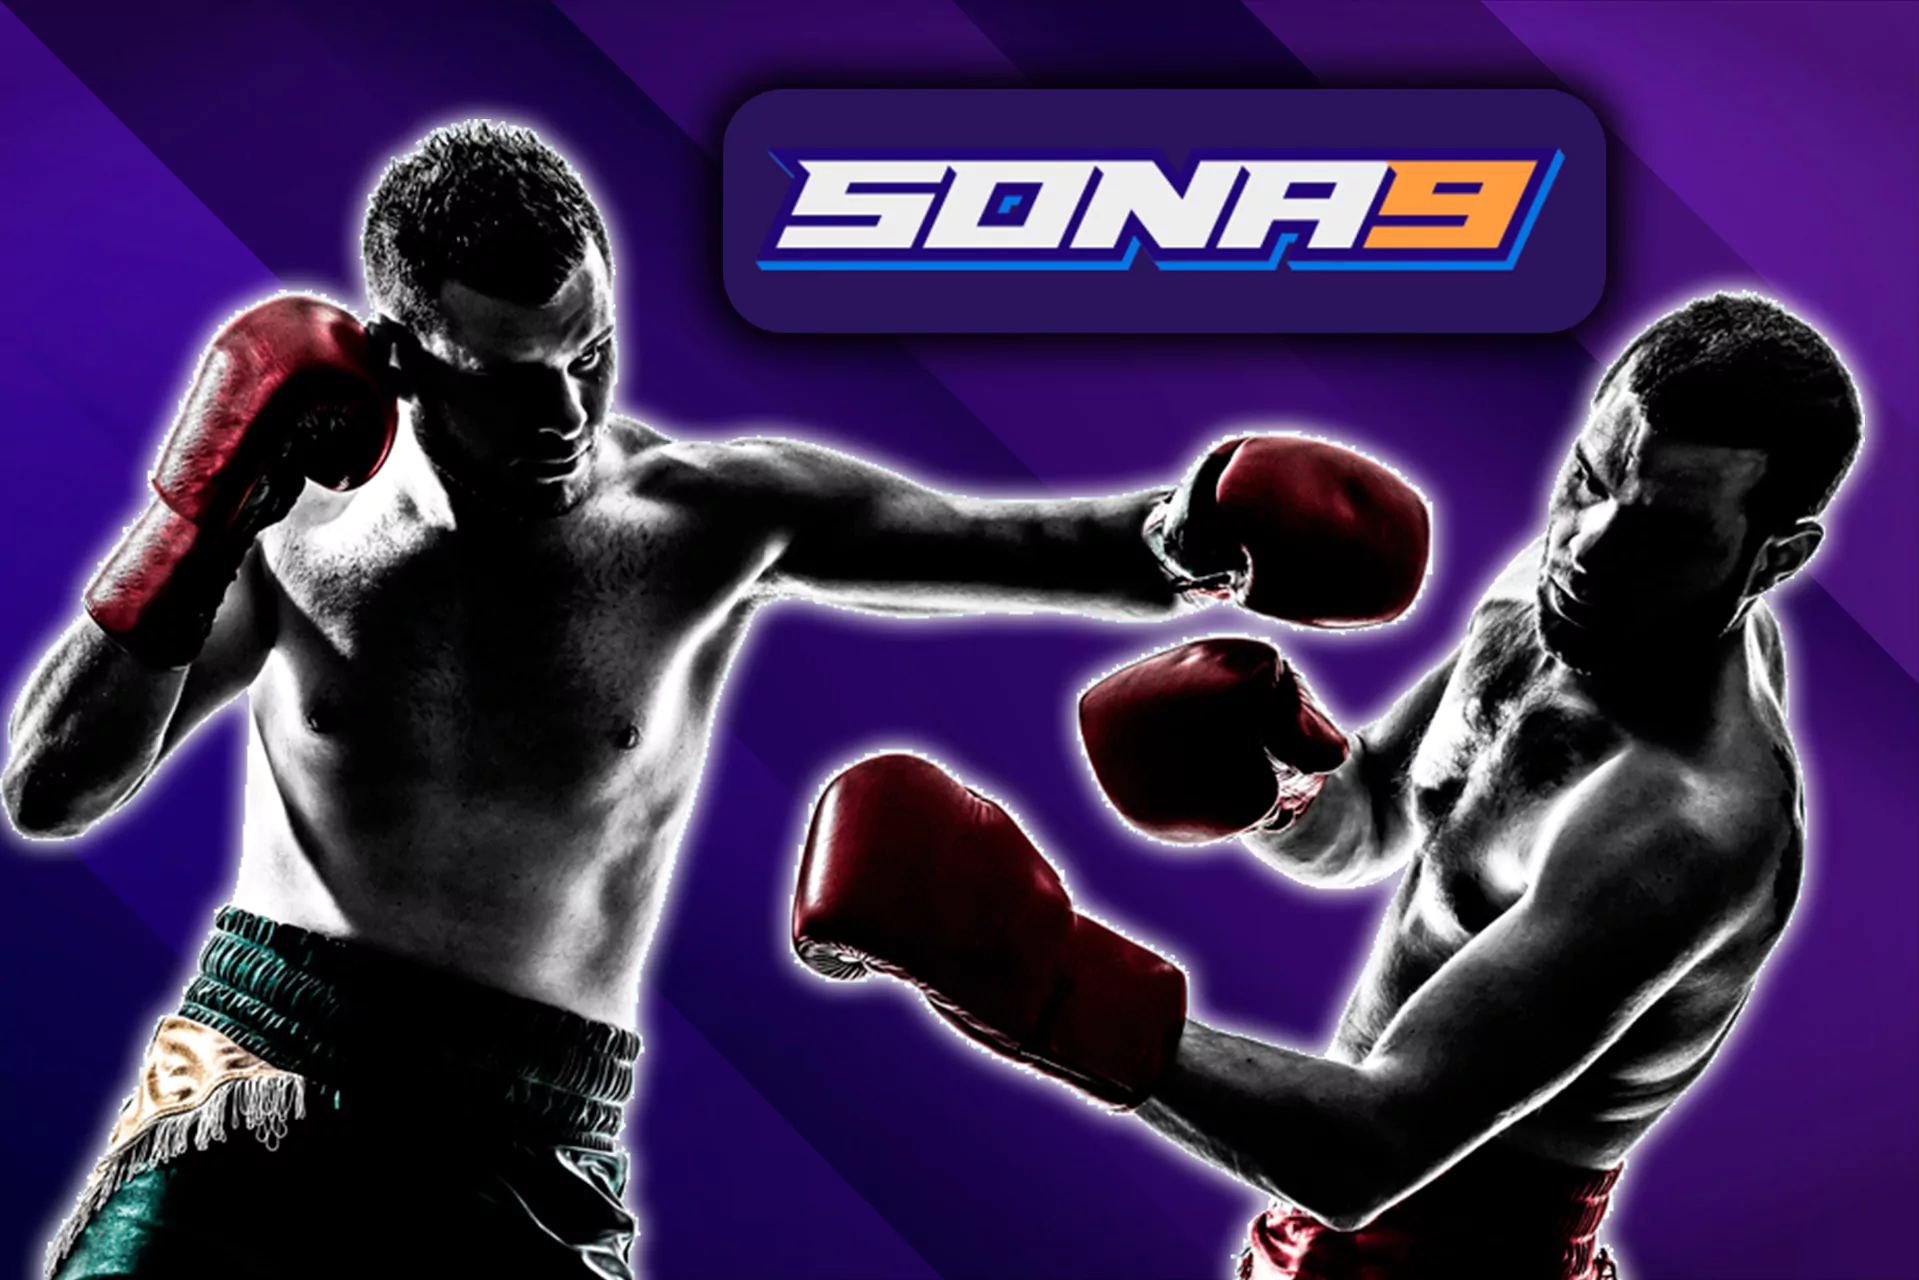 You can bet on boxing at Sona9.